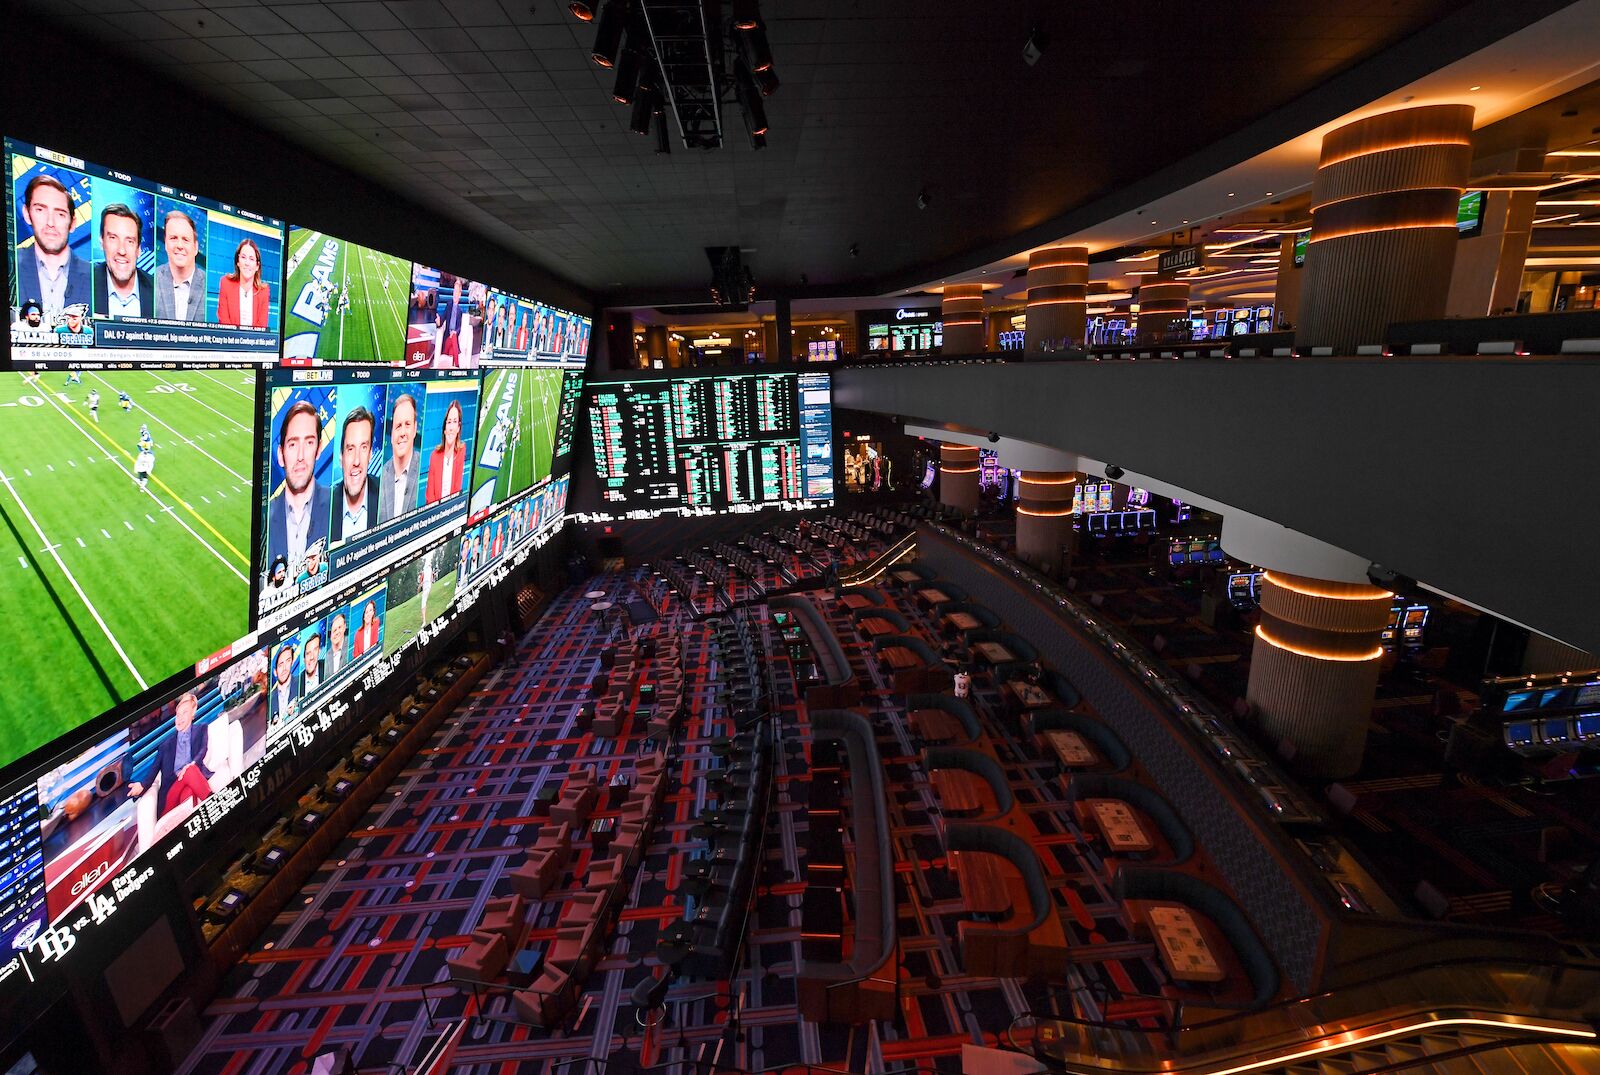 LAS VEGAS, NEVADA - OCTOBER 27: A view of the three-level Circa Sportsbook before the grand opening of Circa Resort & Casino on October 27, 2020 in Las Vegas, Nevada. (Photo by Ethan Miller/Getty Images for Circa Resort & Casino)